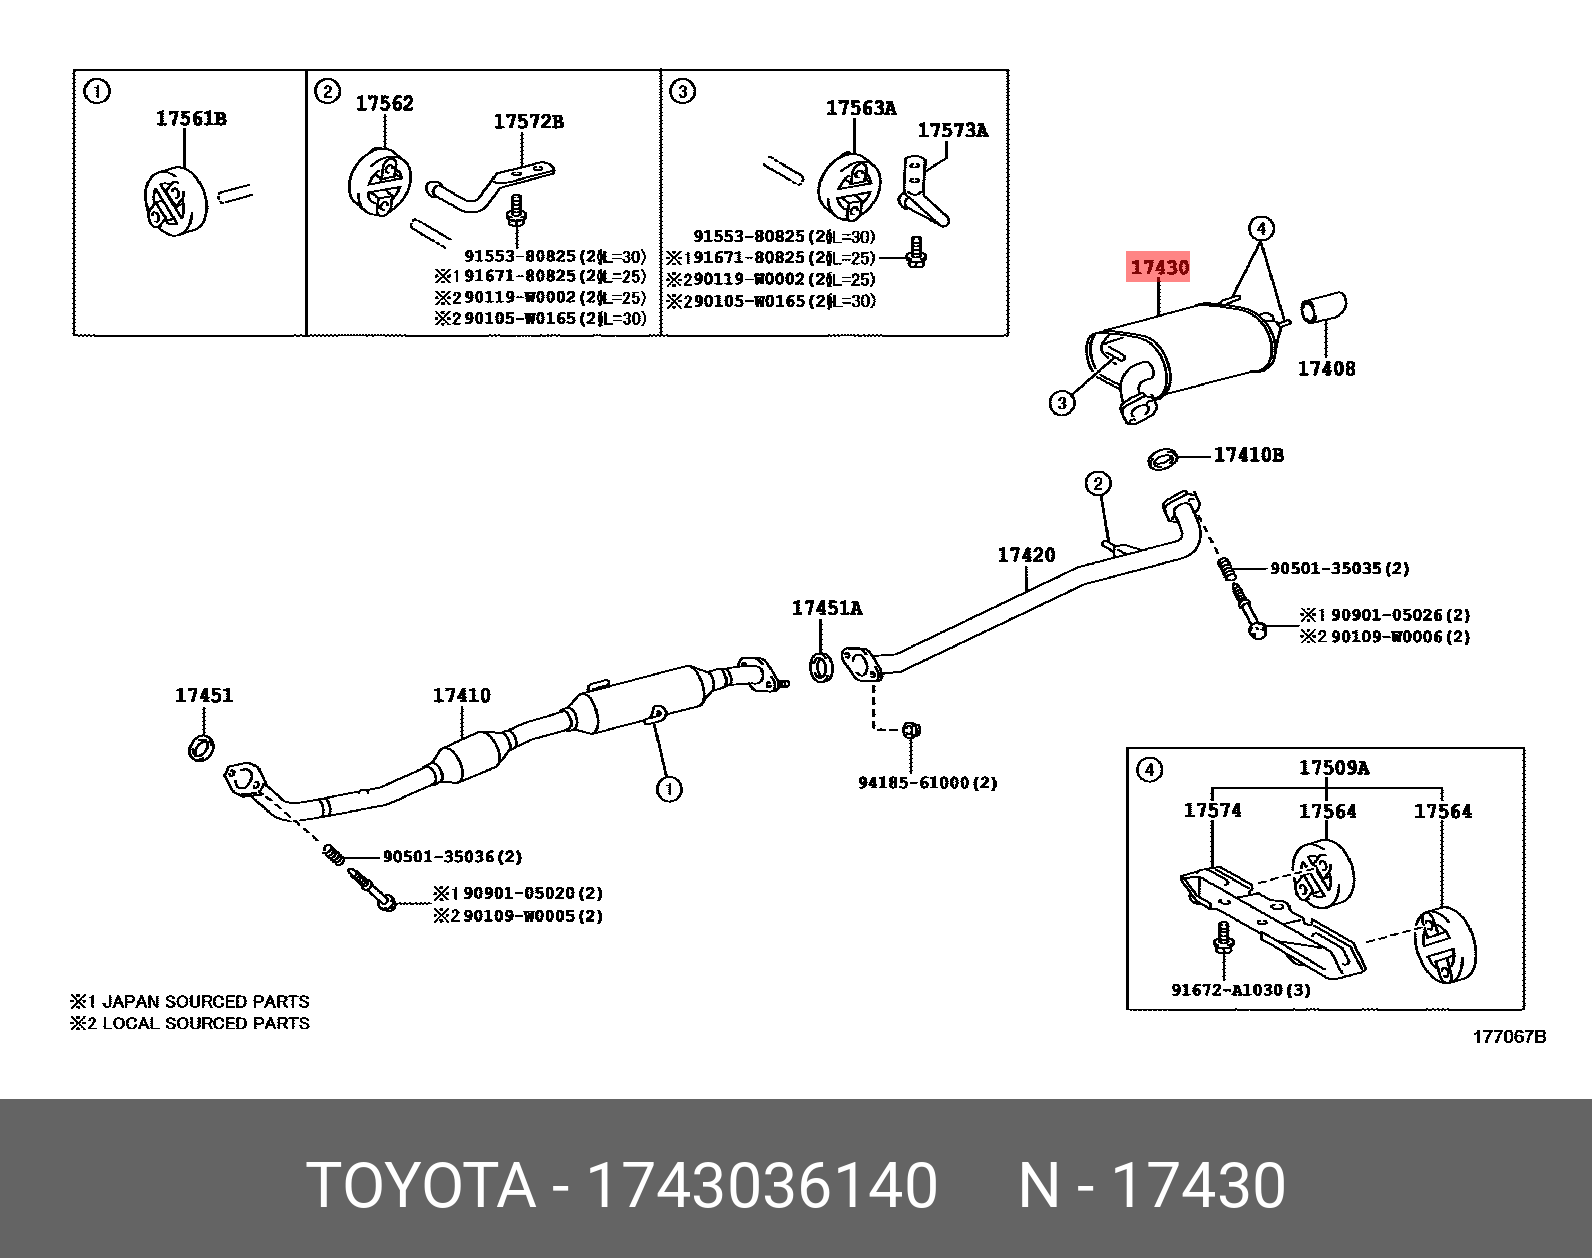 CAMRY HYBRID 201108 - 201704, PIPE ASSY, EXHAUST, TAIL